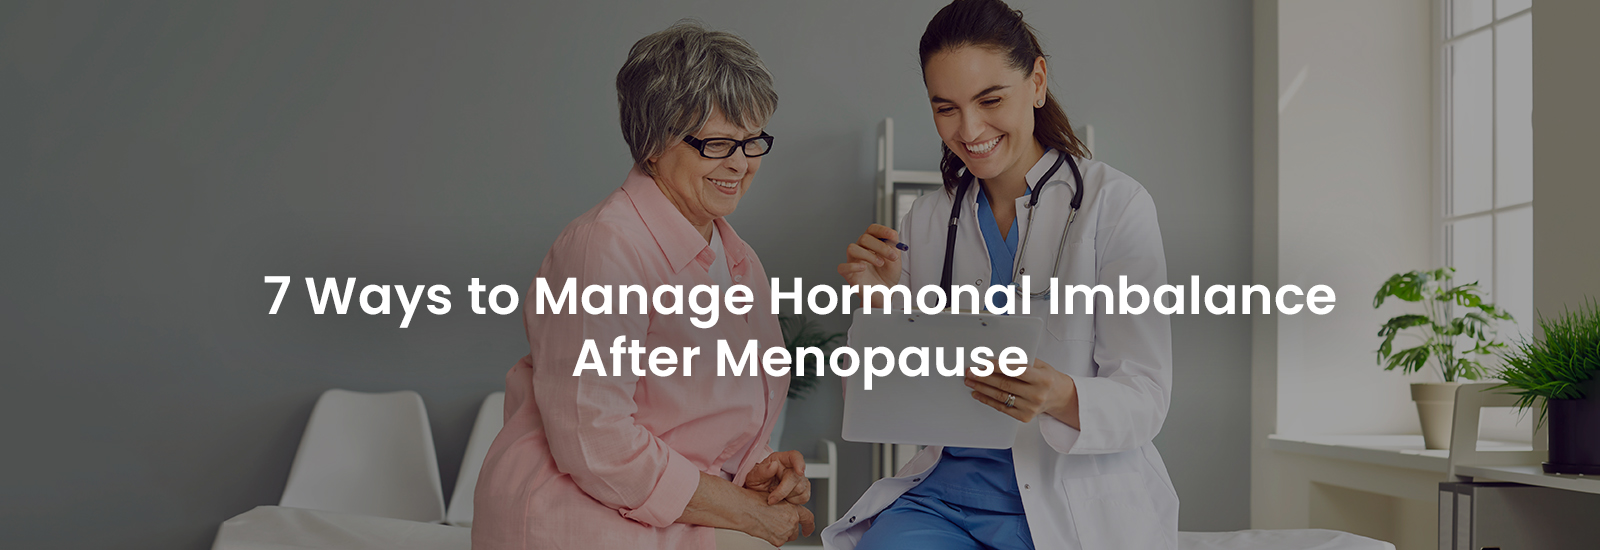 7 Ways to Manage Hormonal Imbalance After Menopause | Banner Image